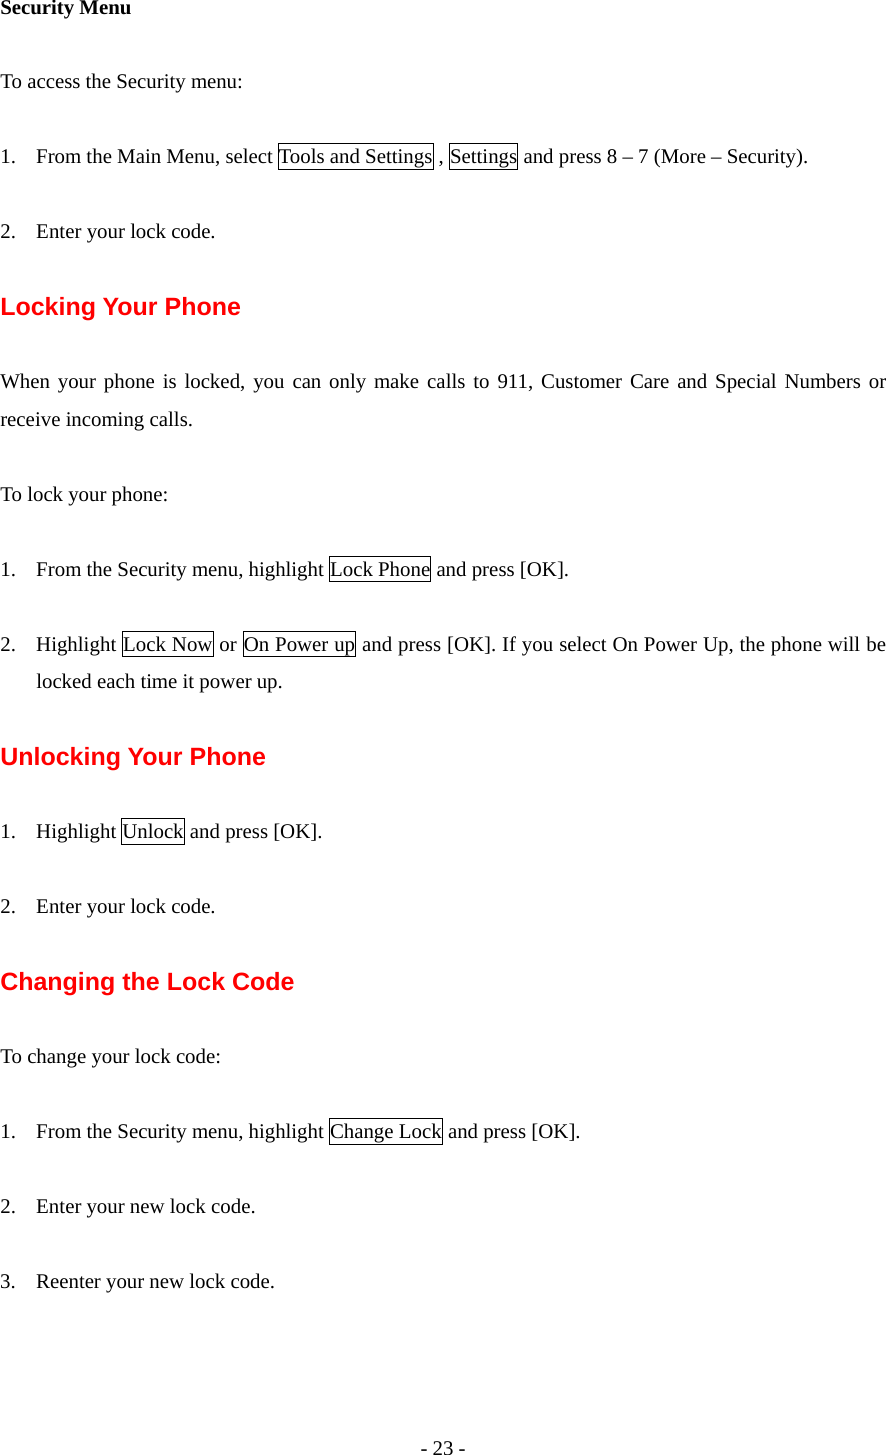 - 23 - Security Menu  To access the Security menu:  1. From the Main Menu, select Tools and Settings , Settings and press 8 – 7 (More – Security).  2. Enter your lock code.  Locking Your Phone    When your phone is locked, you can only make calls to 911, Customer Care and Special Numbers or receive incoming calls.  To lock your phone:  1. From the Security menu, highlight Lock Phone and press [OK].  2. Highlight Lock Now or On Power up and press [OK]. If you select On Power Up, the phone will be locked each time it power up.  Unlocking Your Phone  1. Highlight Unlock and press [OK].  2. Enter your lock code.  Changing the Lock Code  To change your lock code:  1. From the Security menu, highlight Change Lock and press [OK].  2. Enter your new lock code.  3. Reenter your new lock code.  